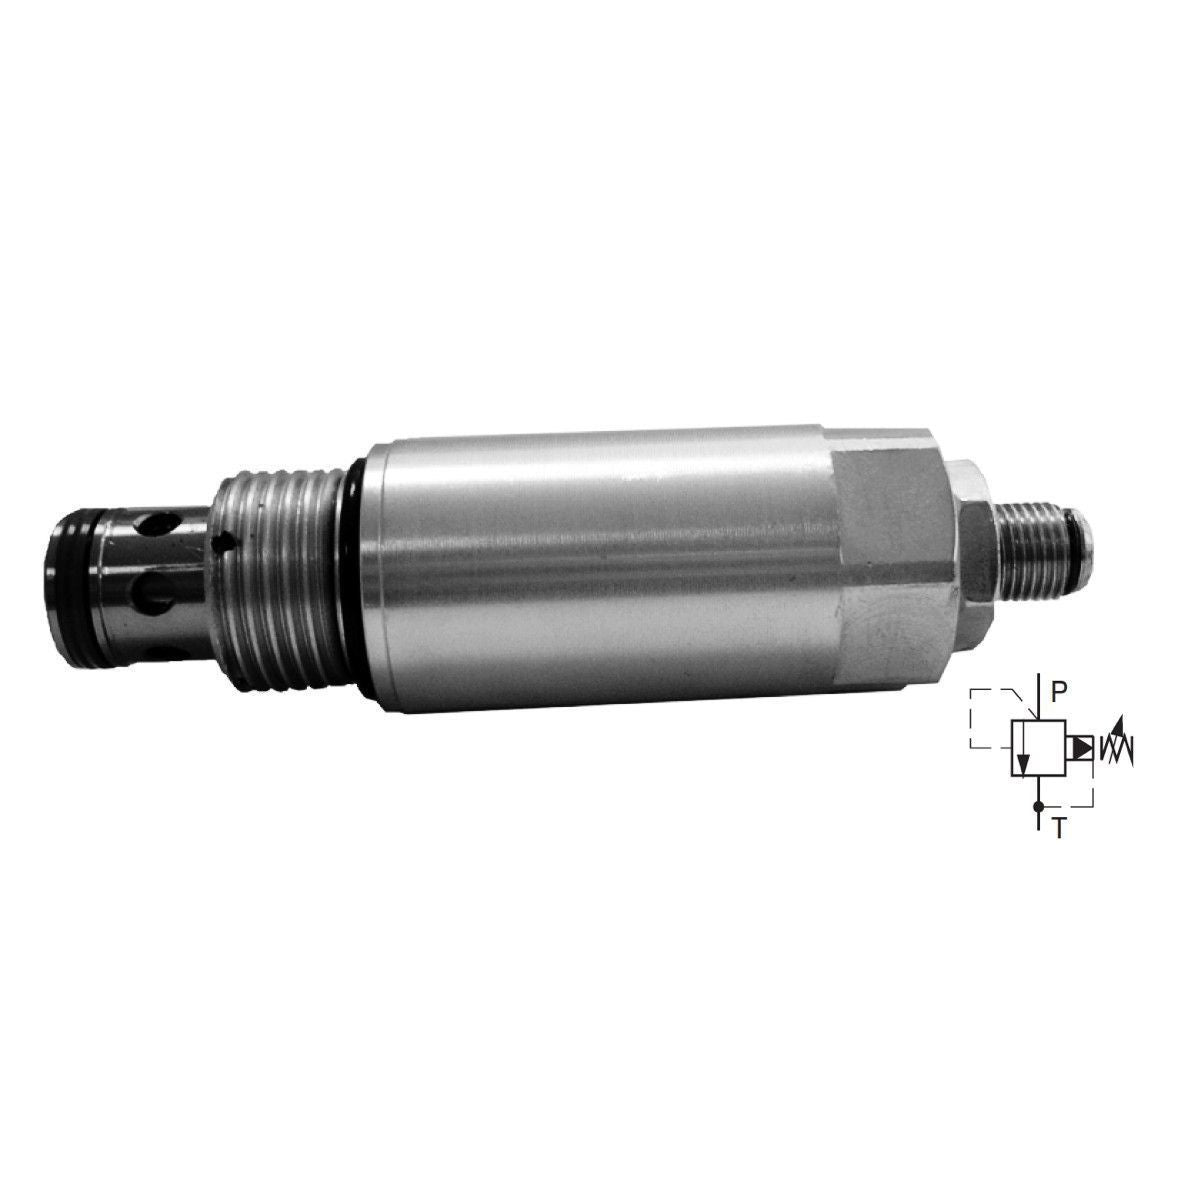 SR4A-B2/H35S-A : Argo Pressure Relief Valve, Spool Type, Pilot-Operated, 26 GPM, 5100psi, Allen Key Screw, Adjustable Up to 5080psi, C-10-2 Cavity